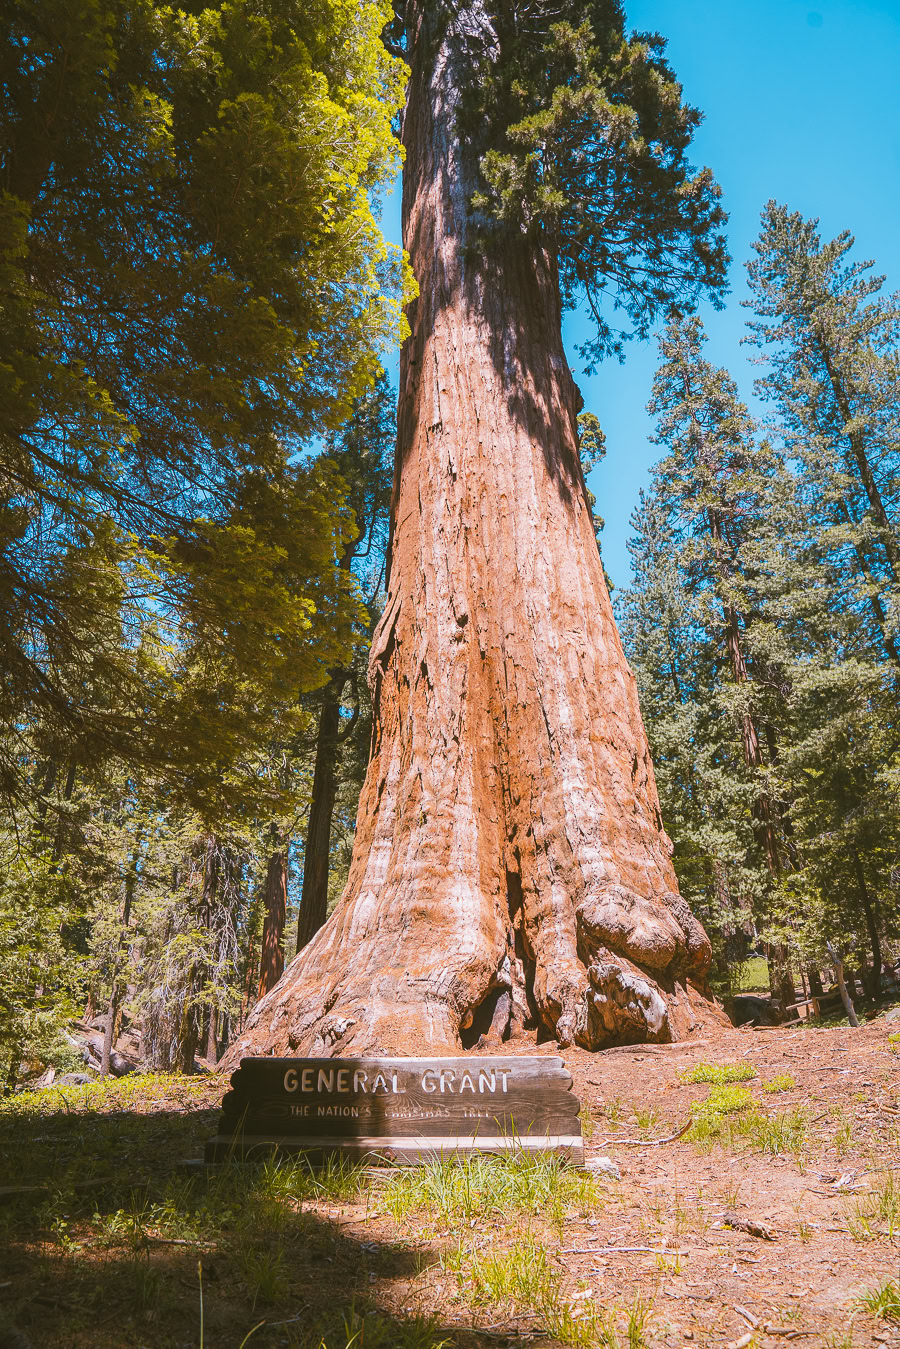 Sequoia National Park Itinerary